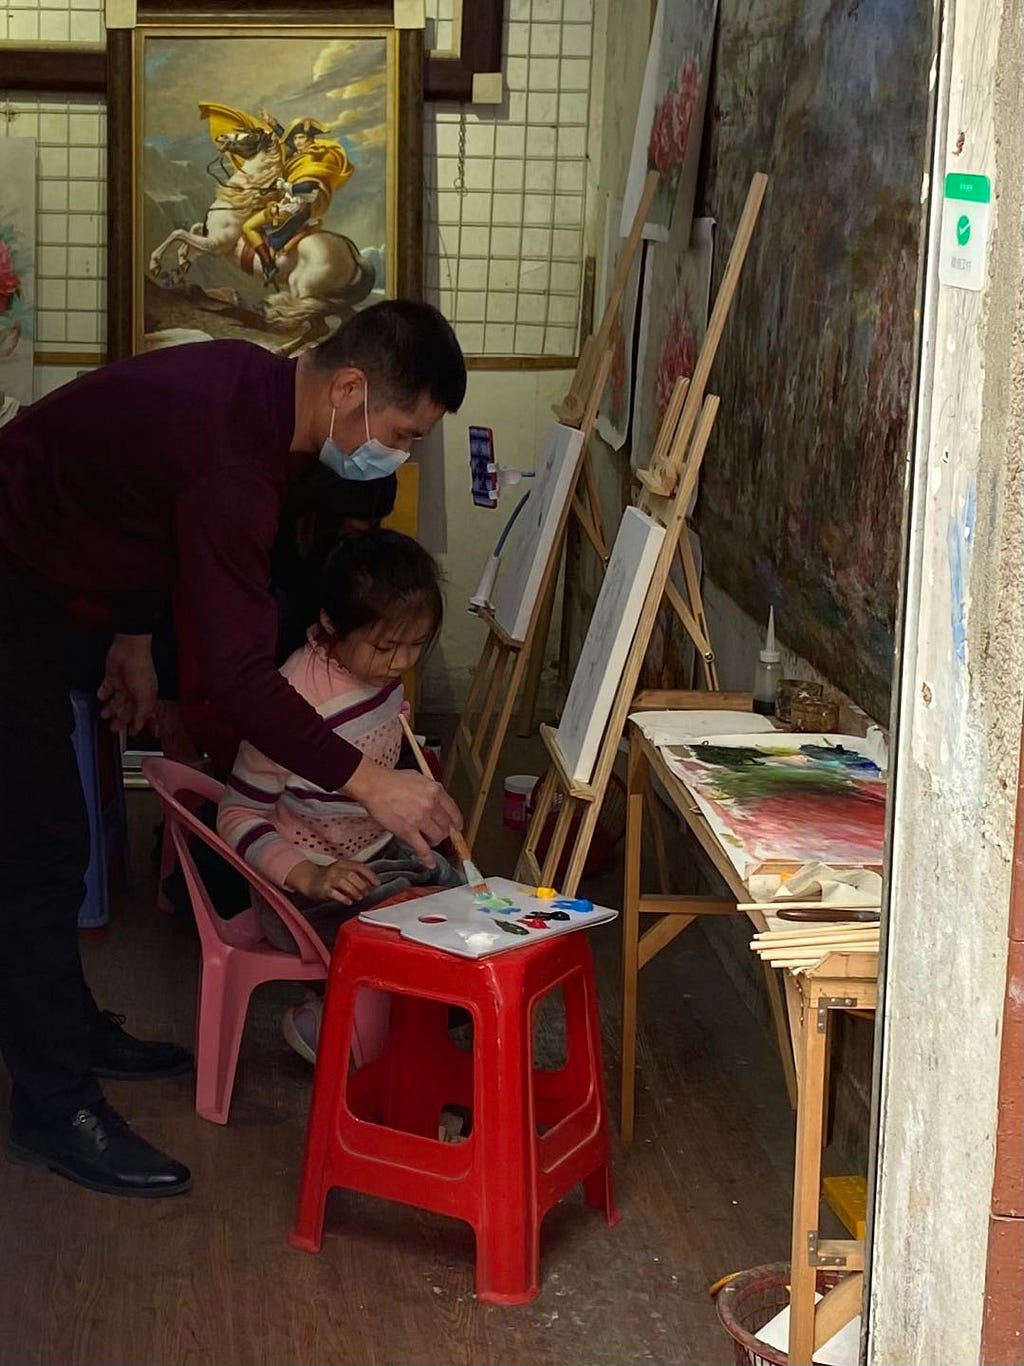 A little girl is learning oil painting from a Dafen Painter